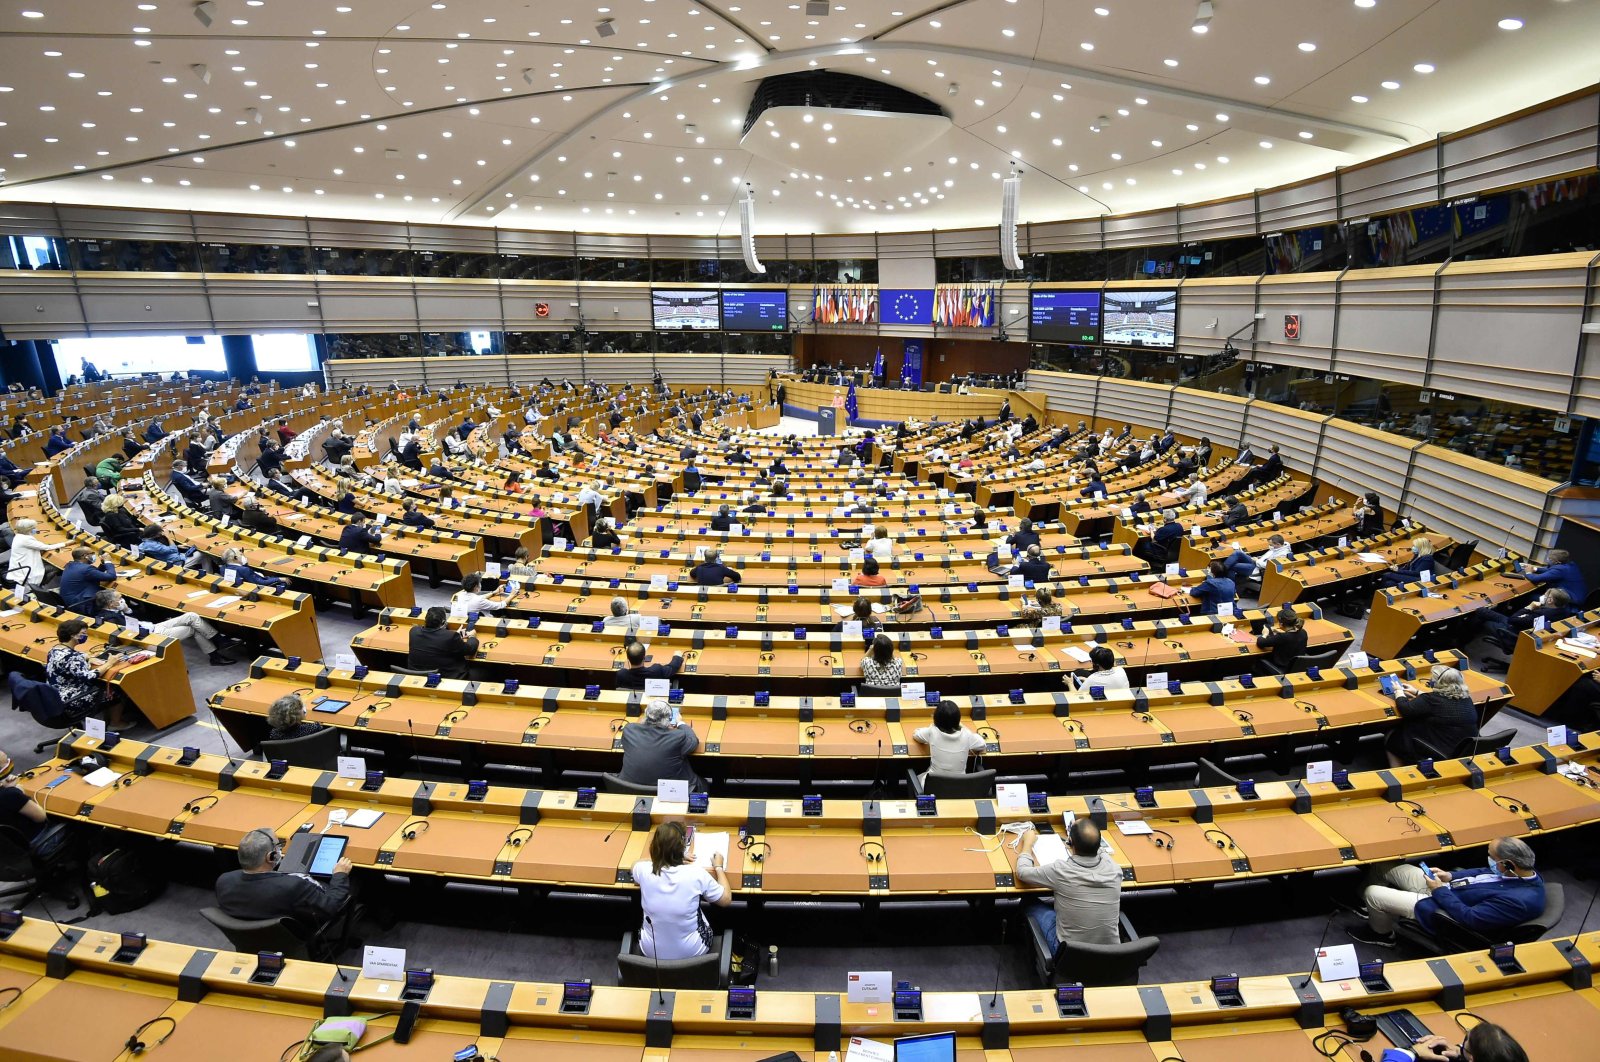 European Union lawmakers attend a plenary session at the European Parliament in Brussels, Sept. 16, 2020. (AFP Photo)